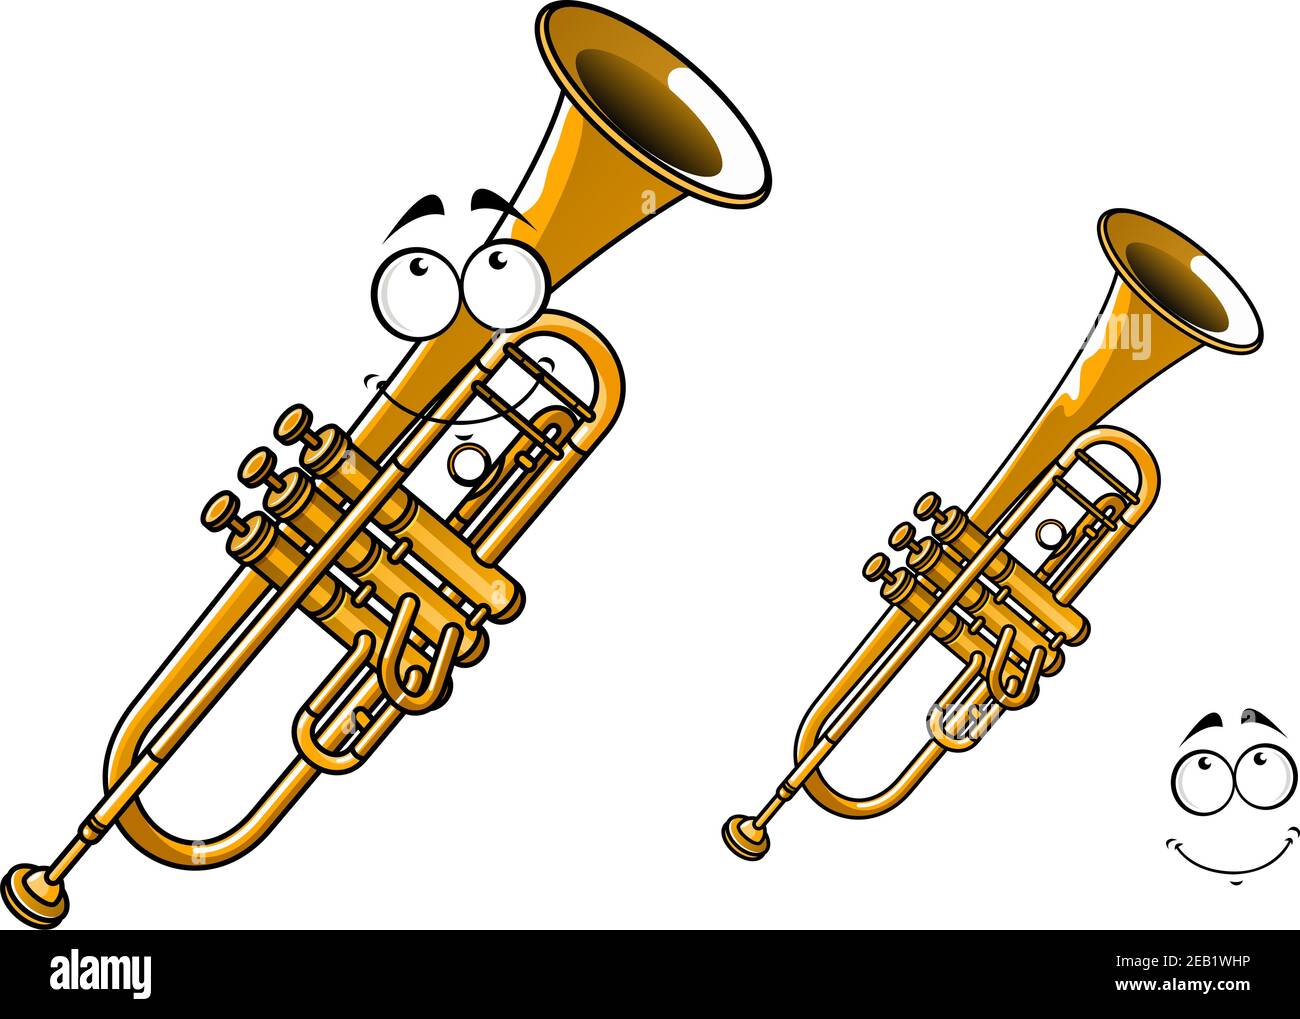 Shy smiling brass trumpet cartoon character showing polished shining wind musical instrument with funny face suitable for classical orchestra concert Stock Vector